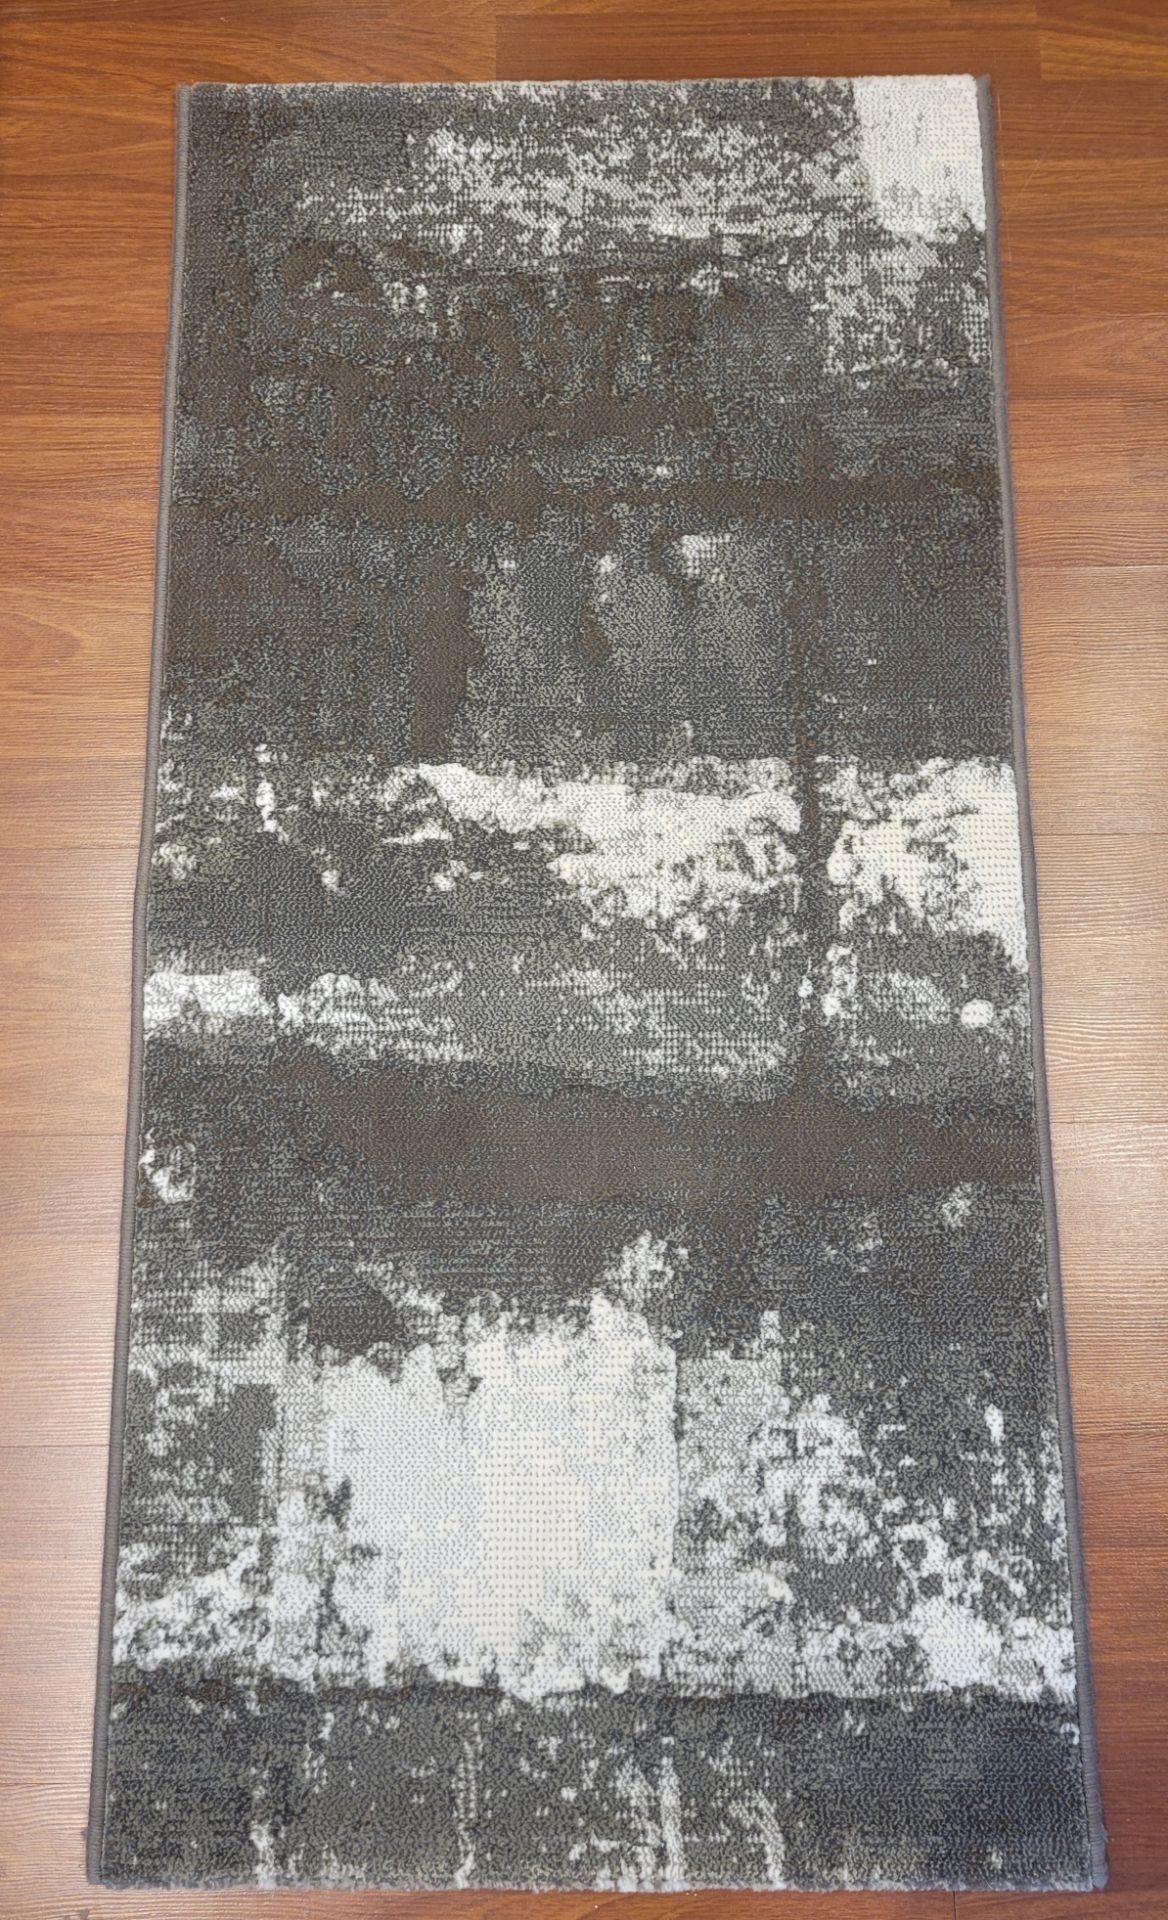 2' X 4' NAXOS MADE IN BELGIUM - MSRP $199.00 EA.(LOCATED IN WALL-TO-WALL) INVENTORY CODE: 12-37 900